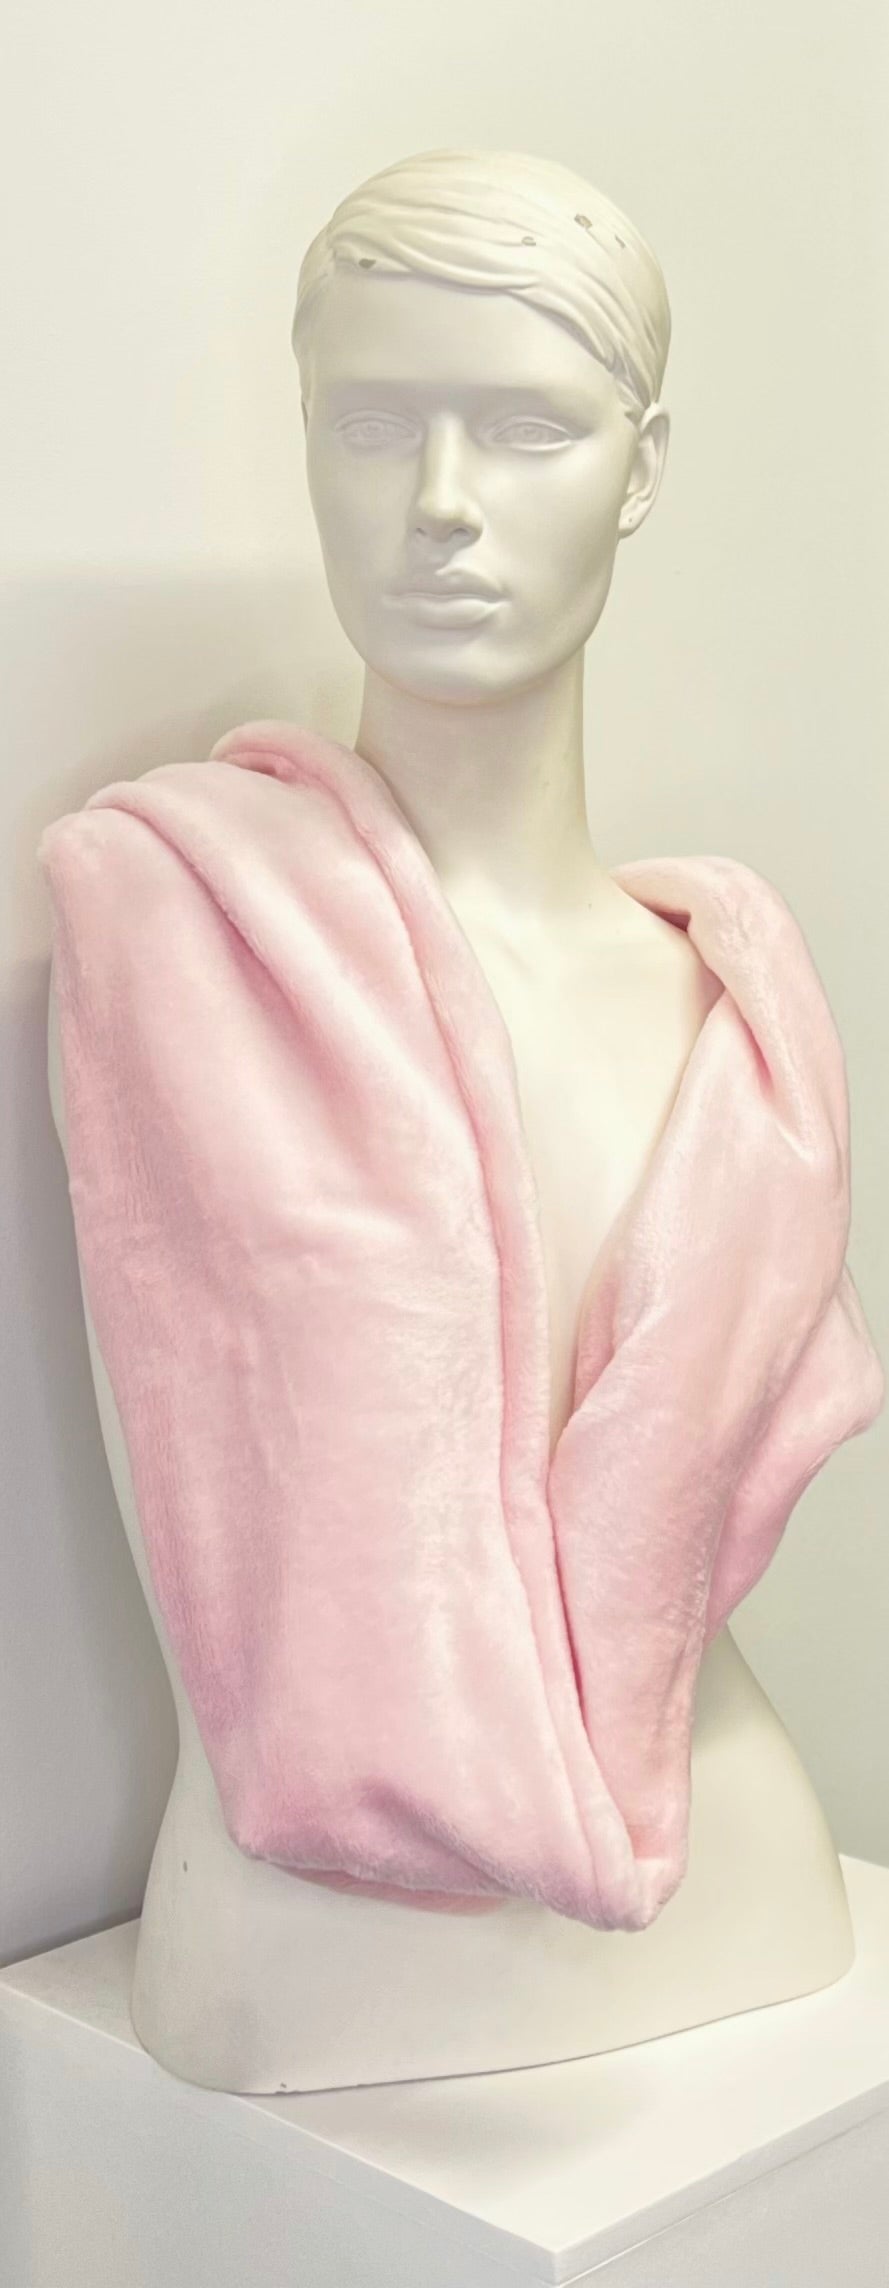 Pale Pink Snuggle Scarf